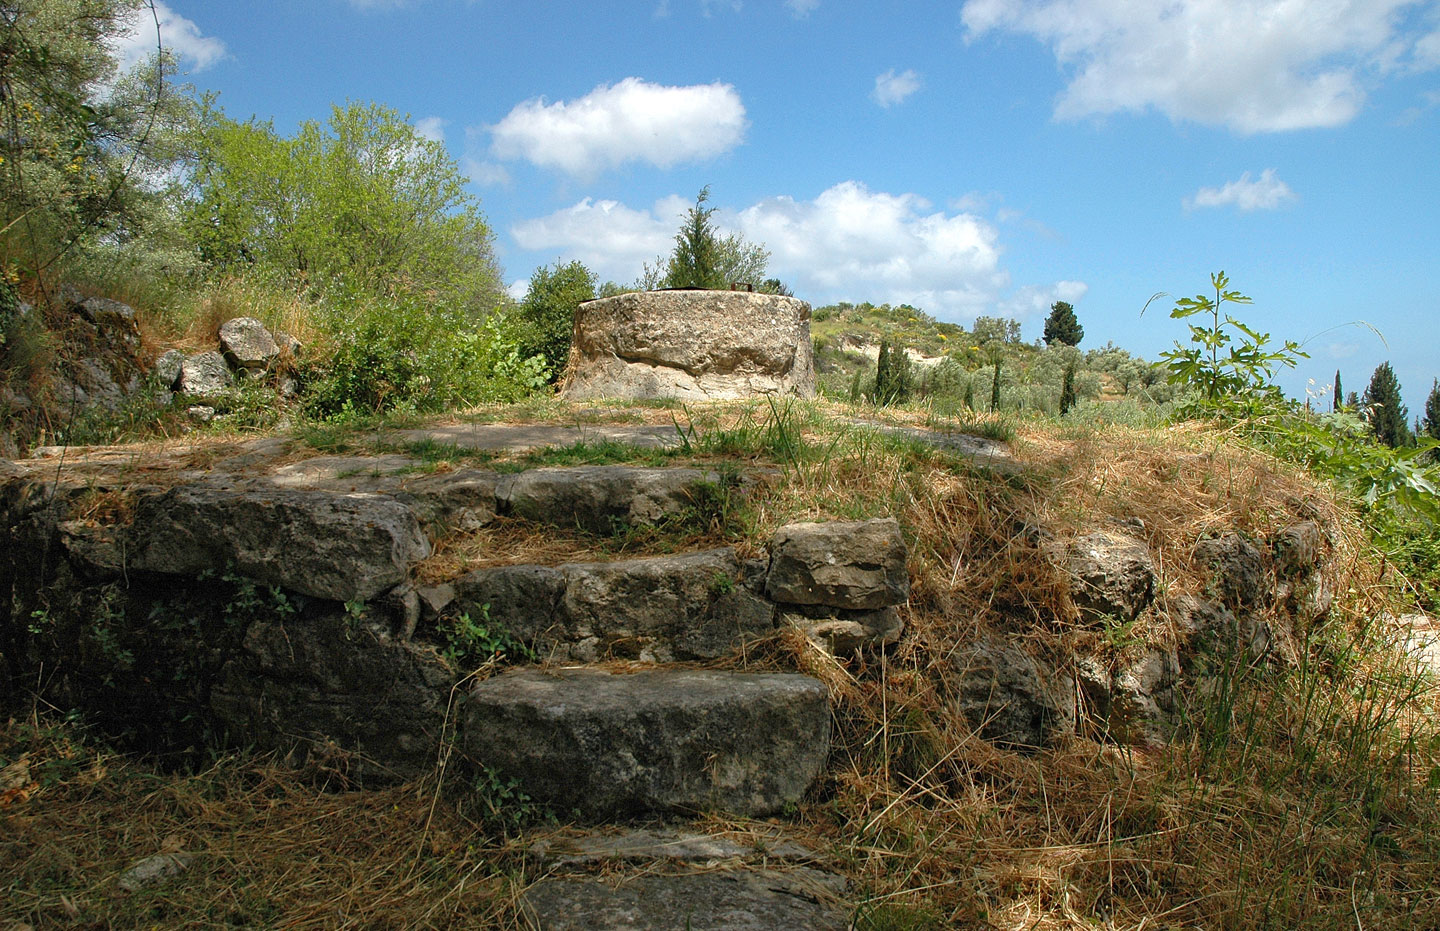  The Stenofrya wells which once supplied the hamlet with water